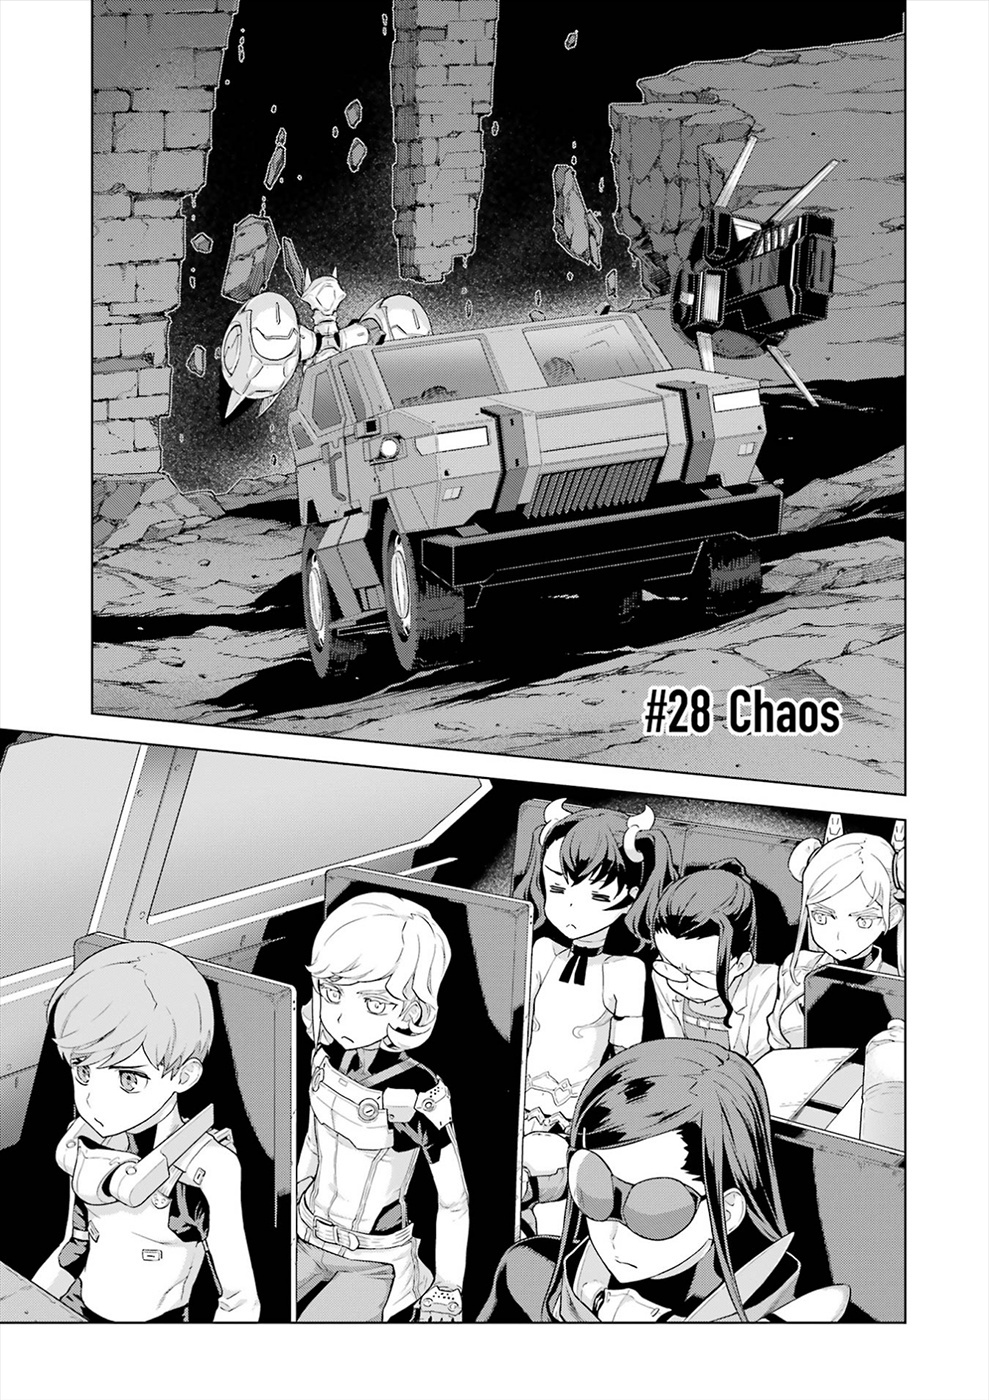 Deep Insanity Vol.6 Chapter 28: Chaos - Picture 1